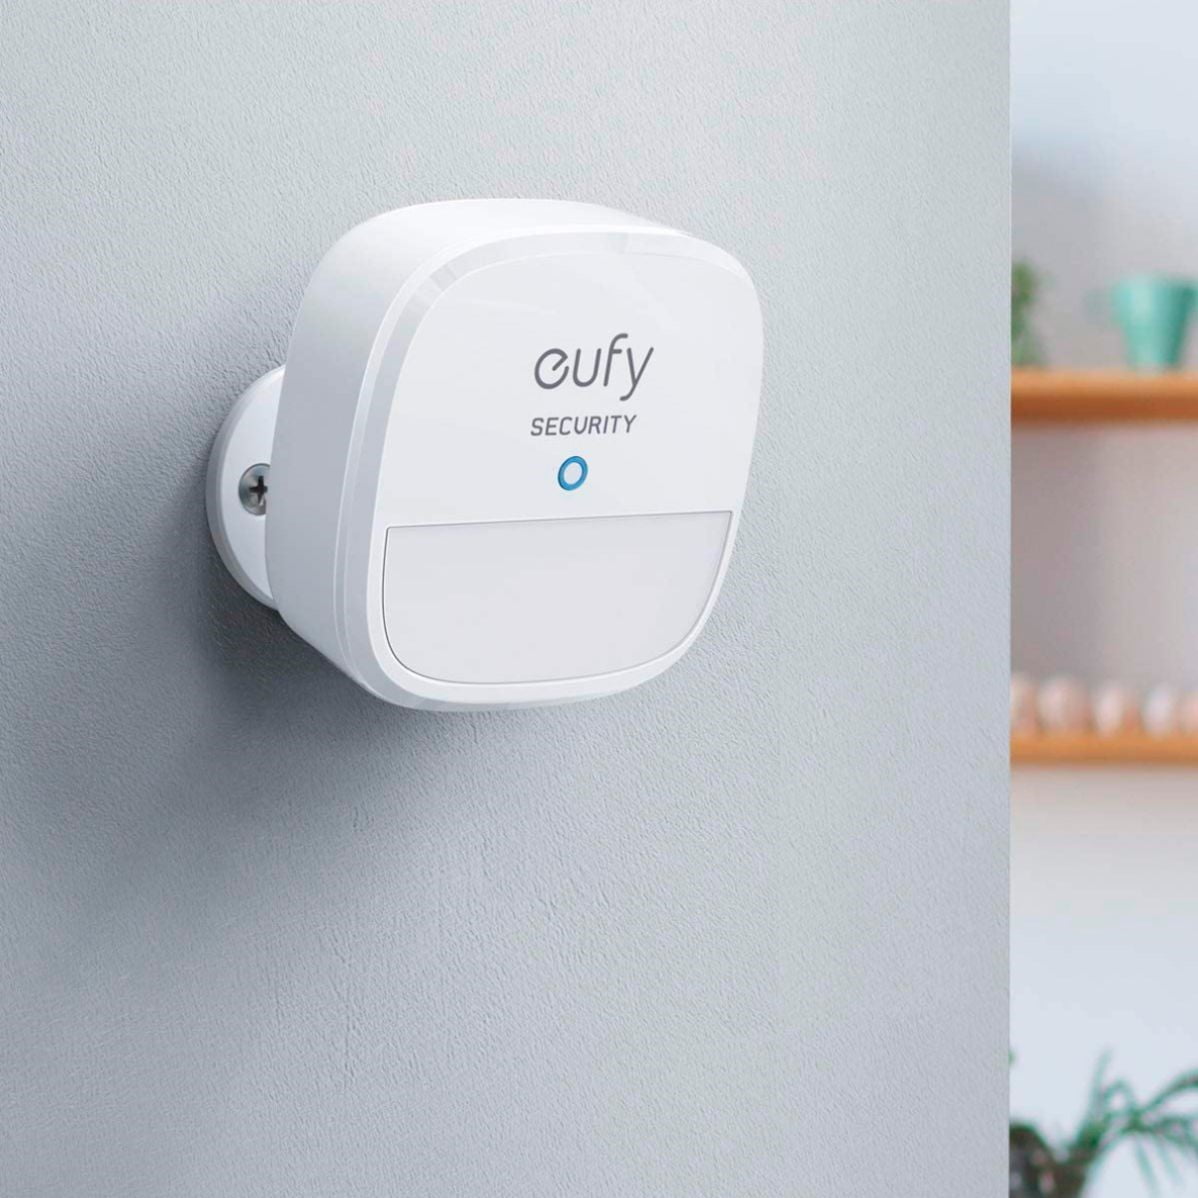 6414441Cv11D 1 Eufy &Lt;H1&Gt;Eufy Smart Home Motion Sensor Add-On - White&Lt;/H1&Gt; Https://Www.youtube.com/Watch?V=Pswixljarbs Protect Your Home With This Eufy Security Home Security Alarm Motion Sensor. A 30-Foot Range And 100-Degree Radius Make It Ideal For A Range Of Setups. The Eufy App Alerts You Via Smartphone The Instant Movement Is Detected, And A Sensor Easily Connects With Other Eufy Home Security Products And Adjusts To Accommodate Pets. With A 2-Year Battery Life, This Eufy Home Security Alarm Motion Sensor Provides Long-Term Security. Motion Sensor Eufy Smart Home Motion Sensor Add-On - White